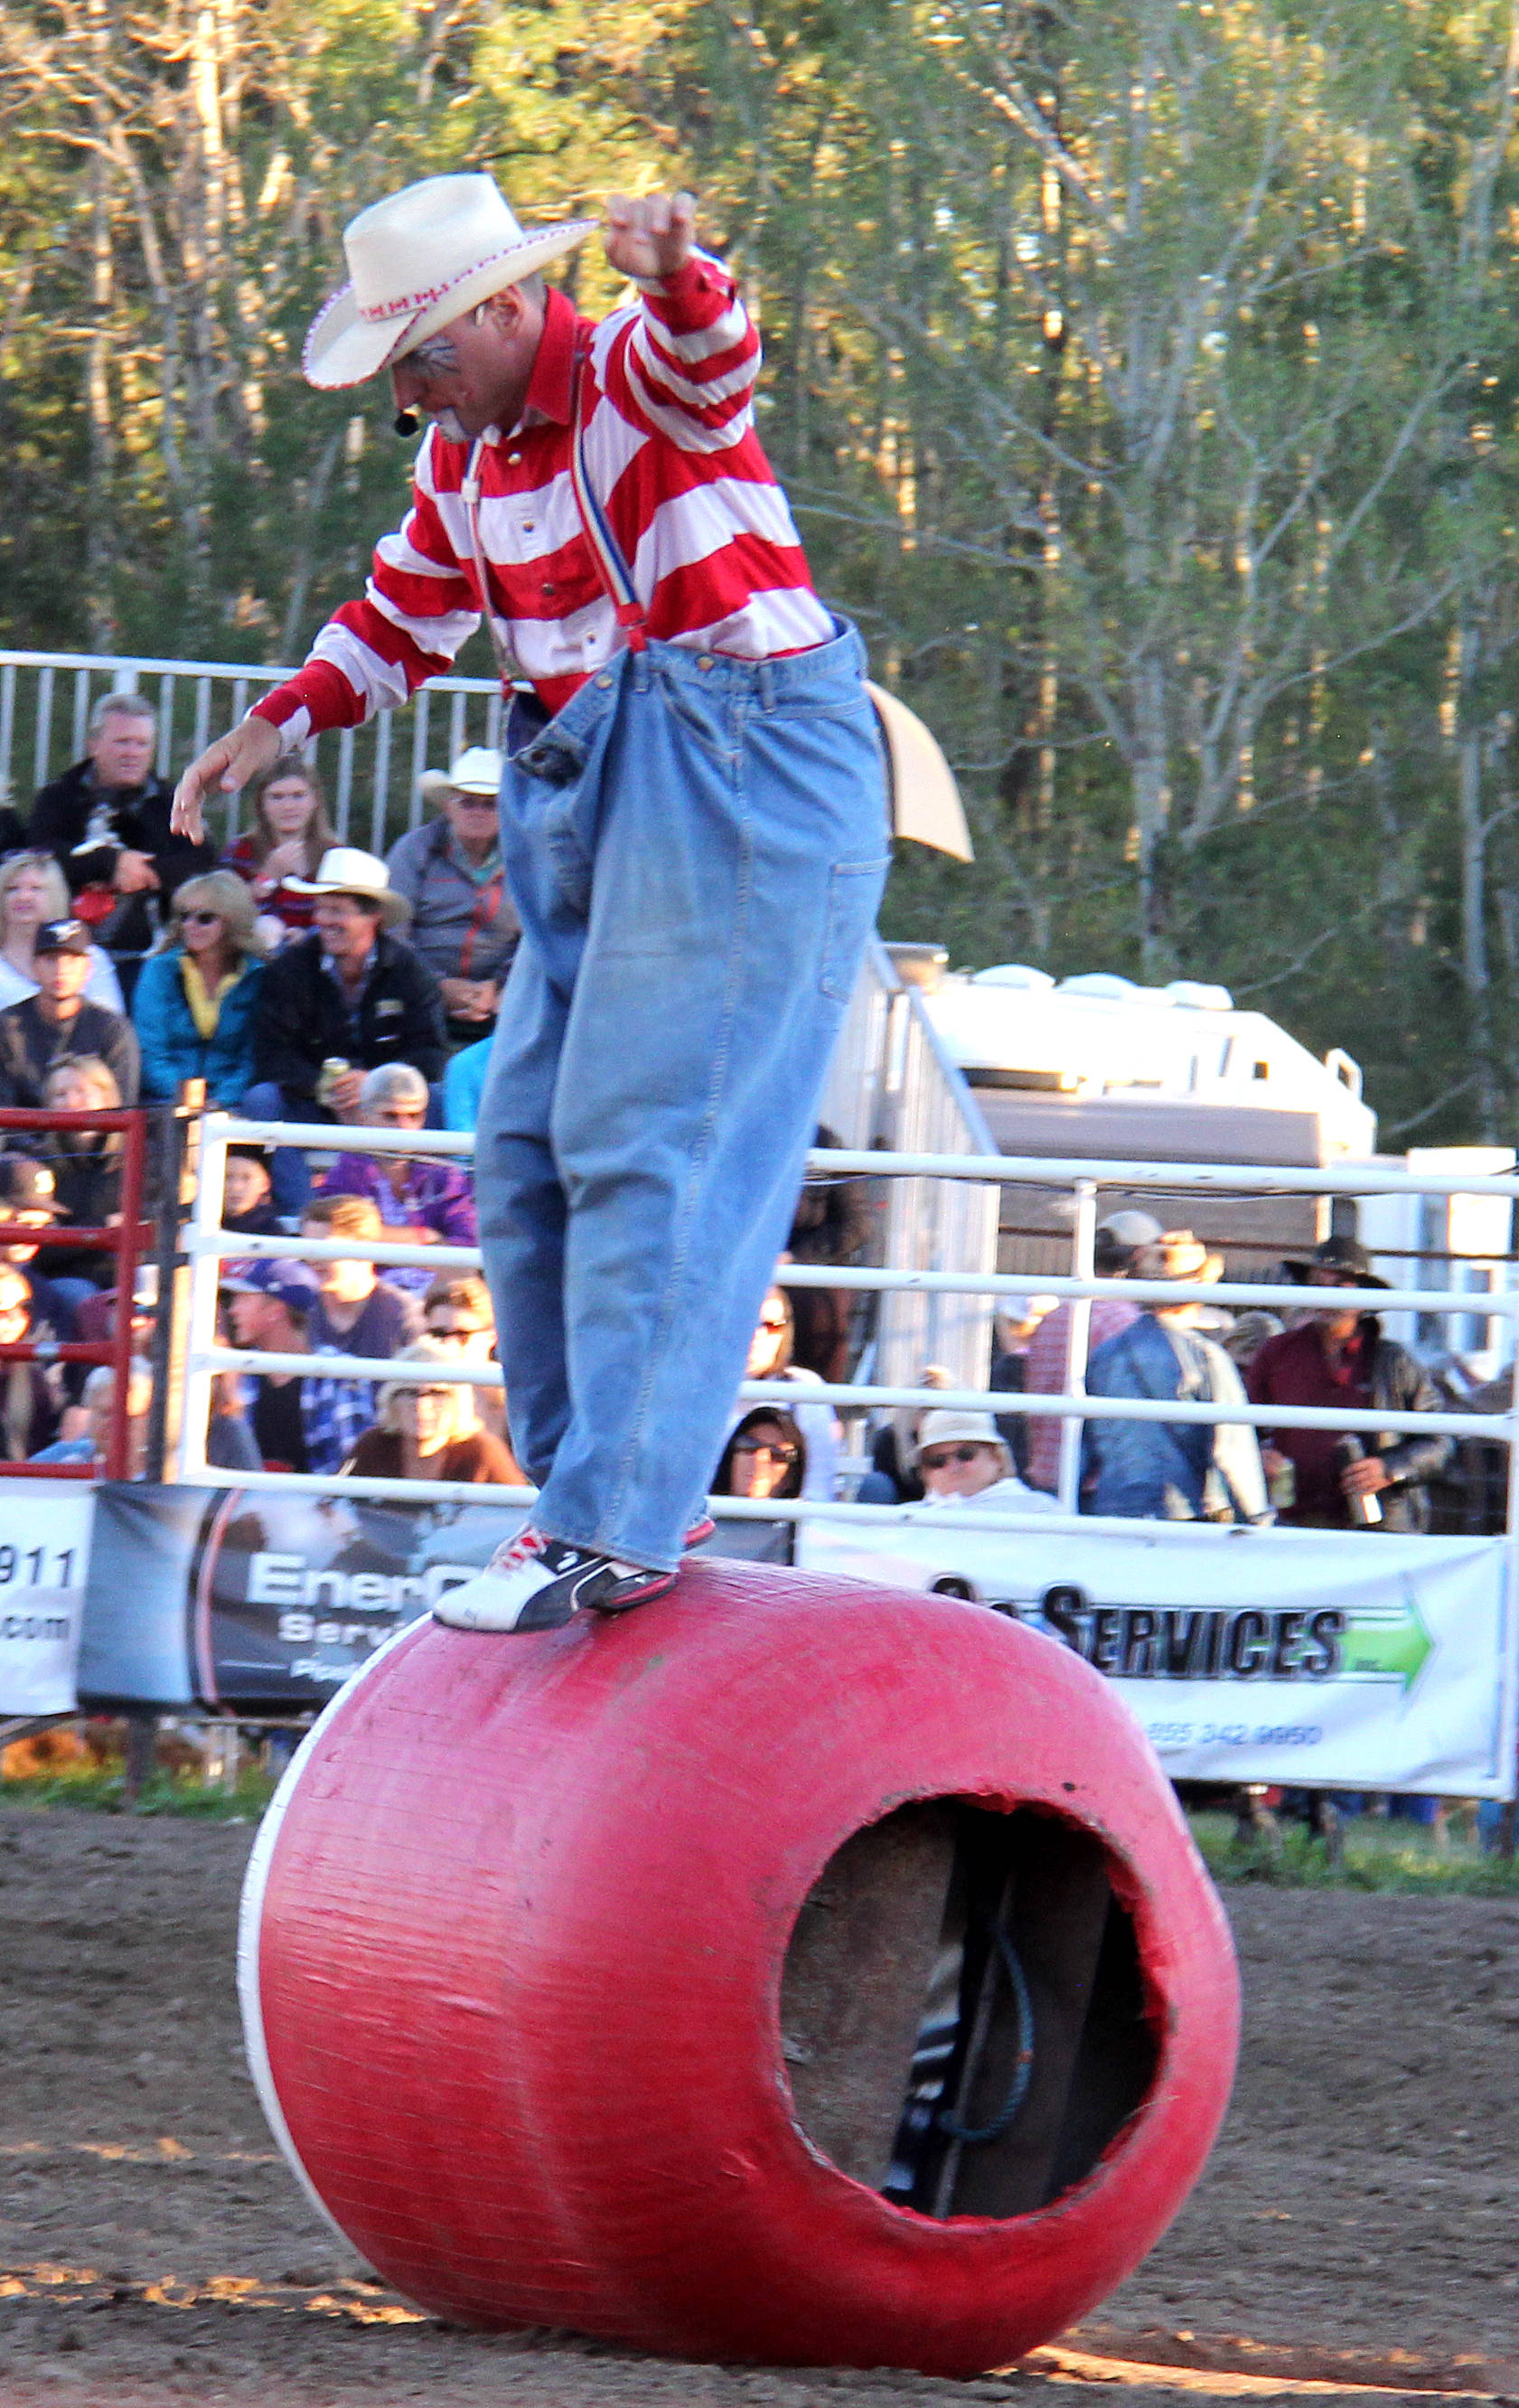 A rodeo clown entertains the audience, while the handlers perpare for the next event.